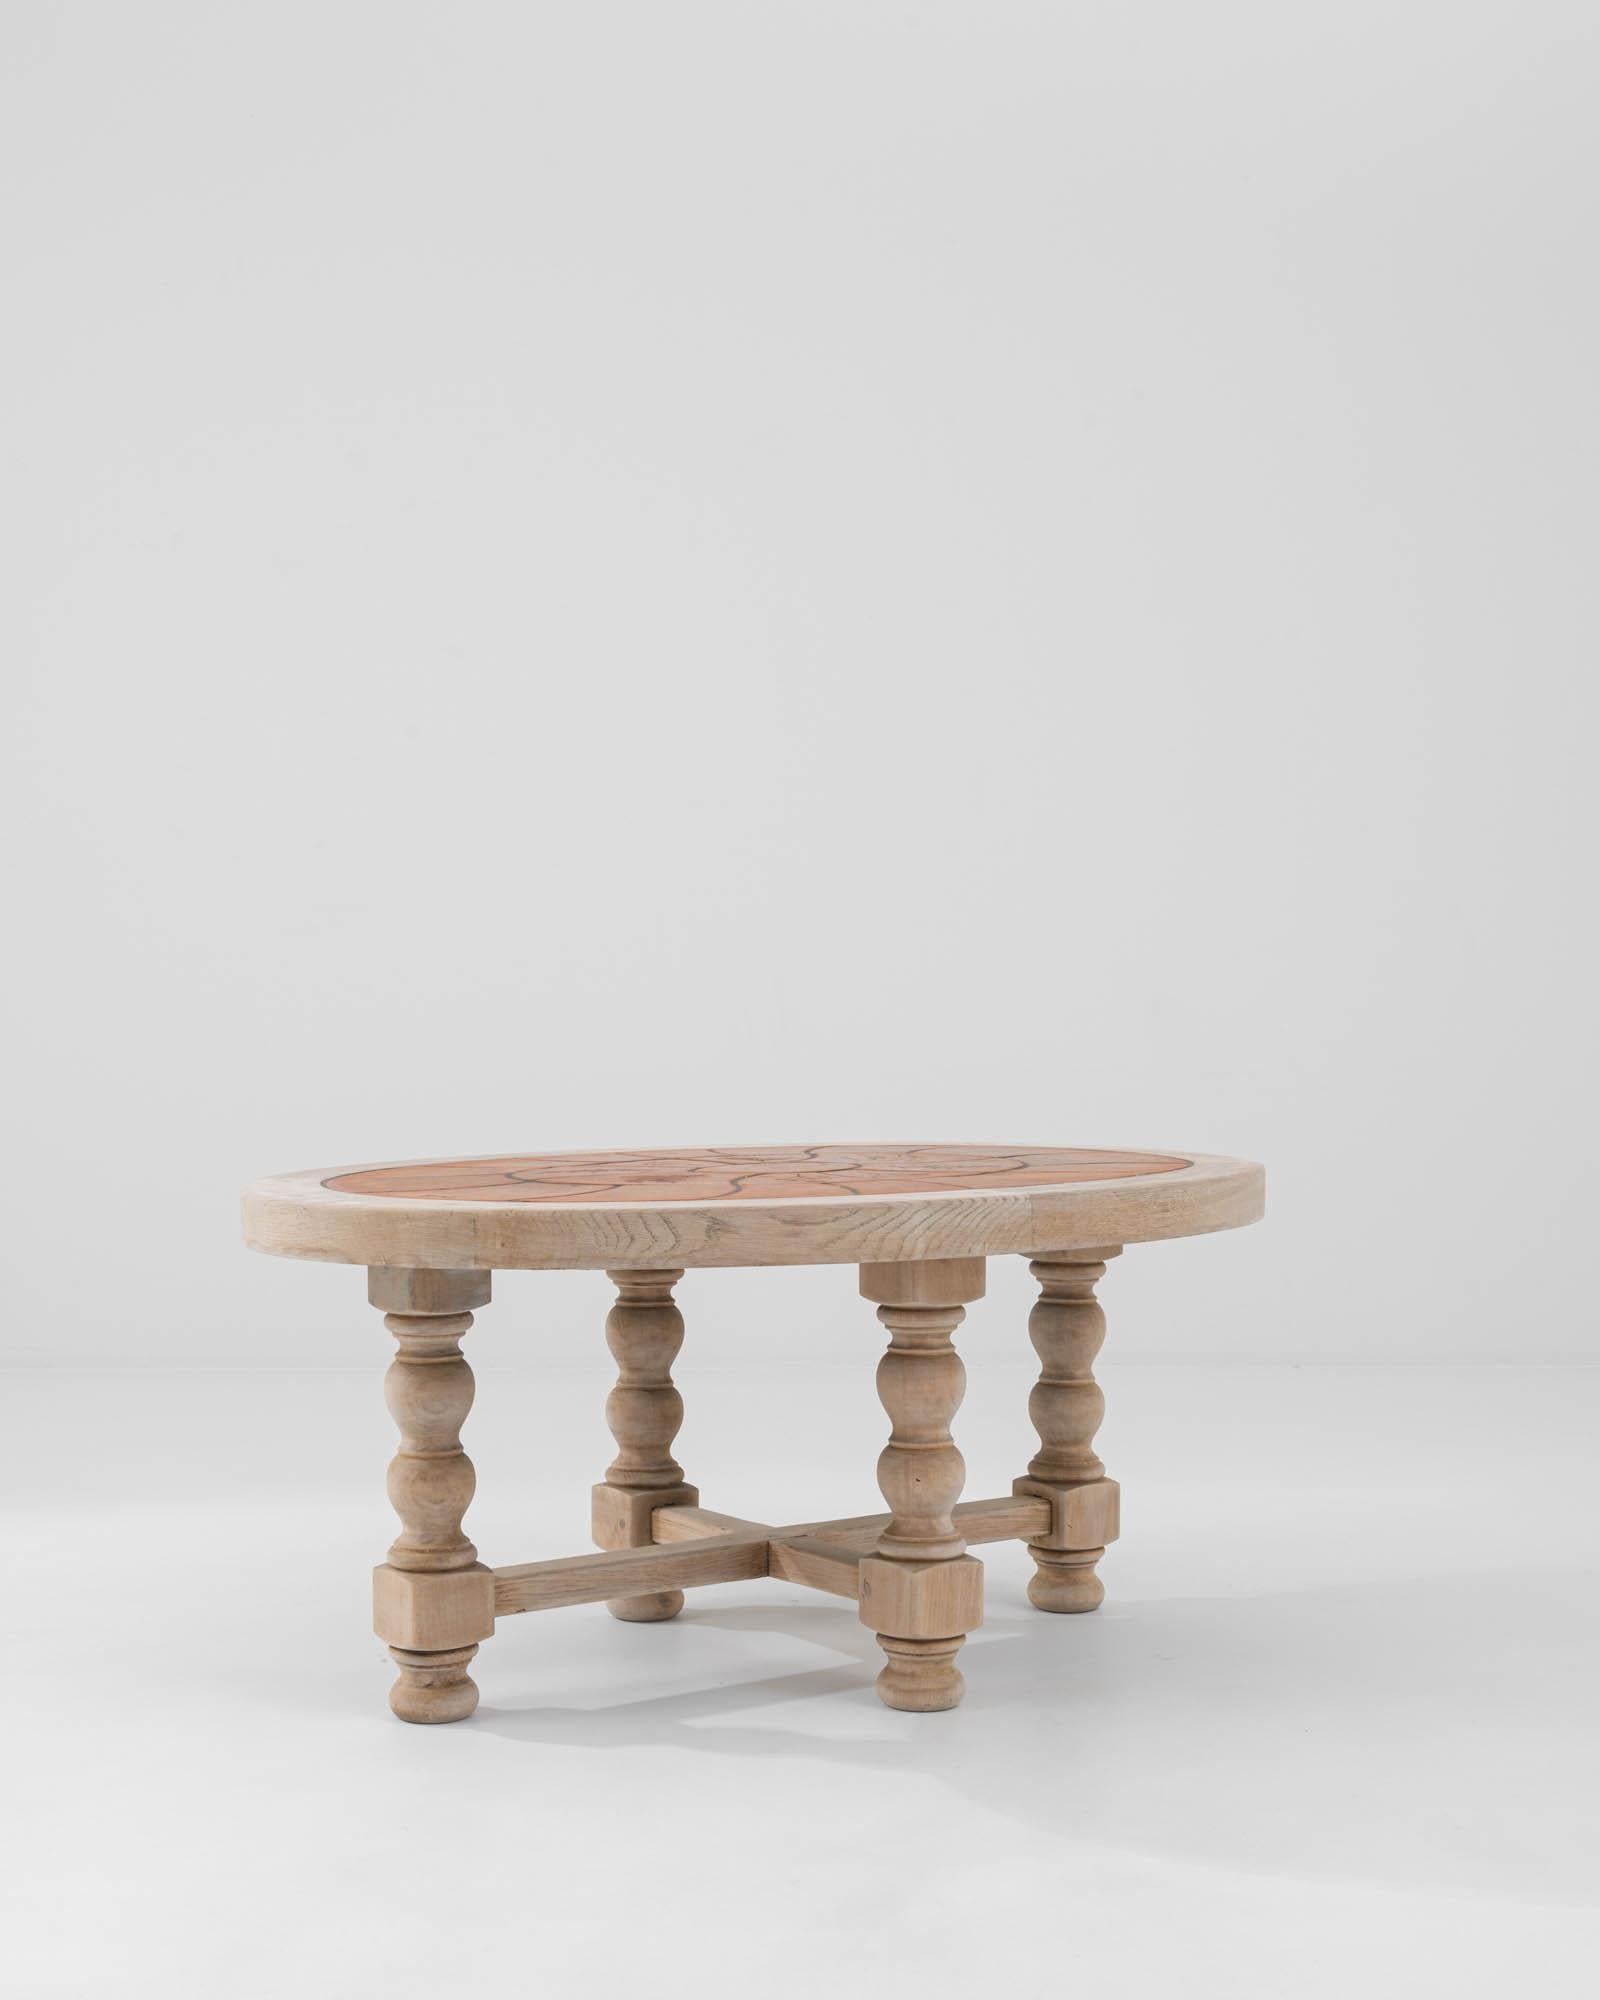 A wooden and ceramic coffee table created in 20th century France. This ornate and playful table exudes a sense of calm and beauty. The tabletop is created from a pattern of delightfully shaped ceramic types, which are inscribed with intricate floral